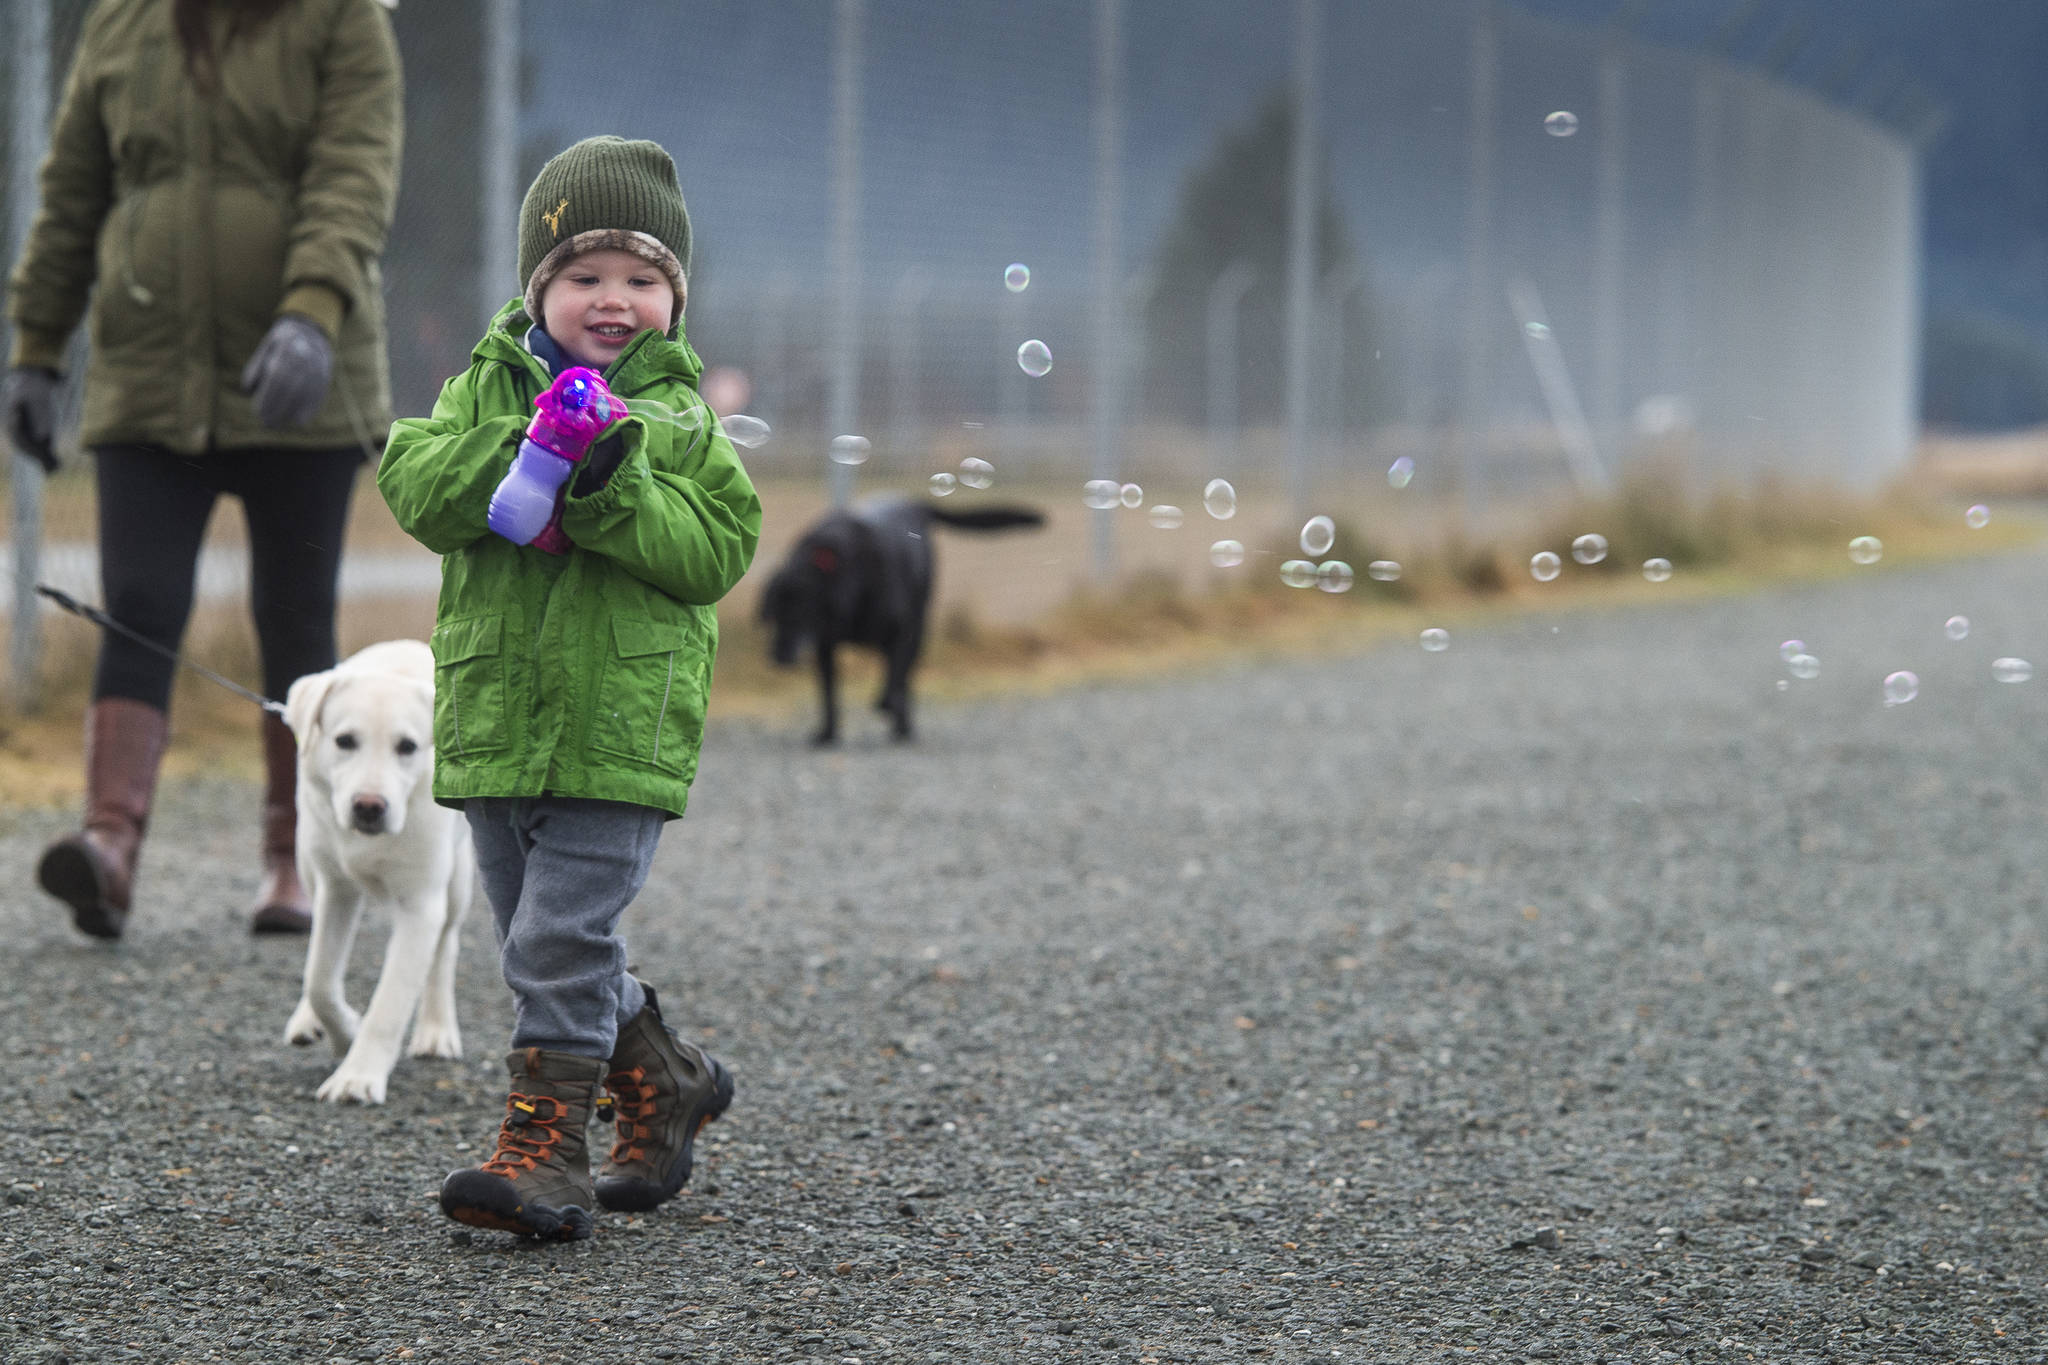 Otis Ward, 3, fires off his soap bubble gun while on a walk with his parents, Mike and Jessalyn, along the Airport Dike Trail on Wednesday, Jan. 2, 2019. (Michael Penn | Juneau Empire)